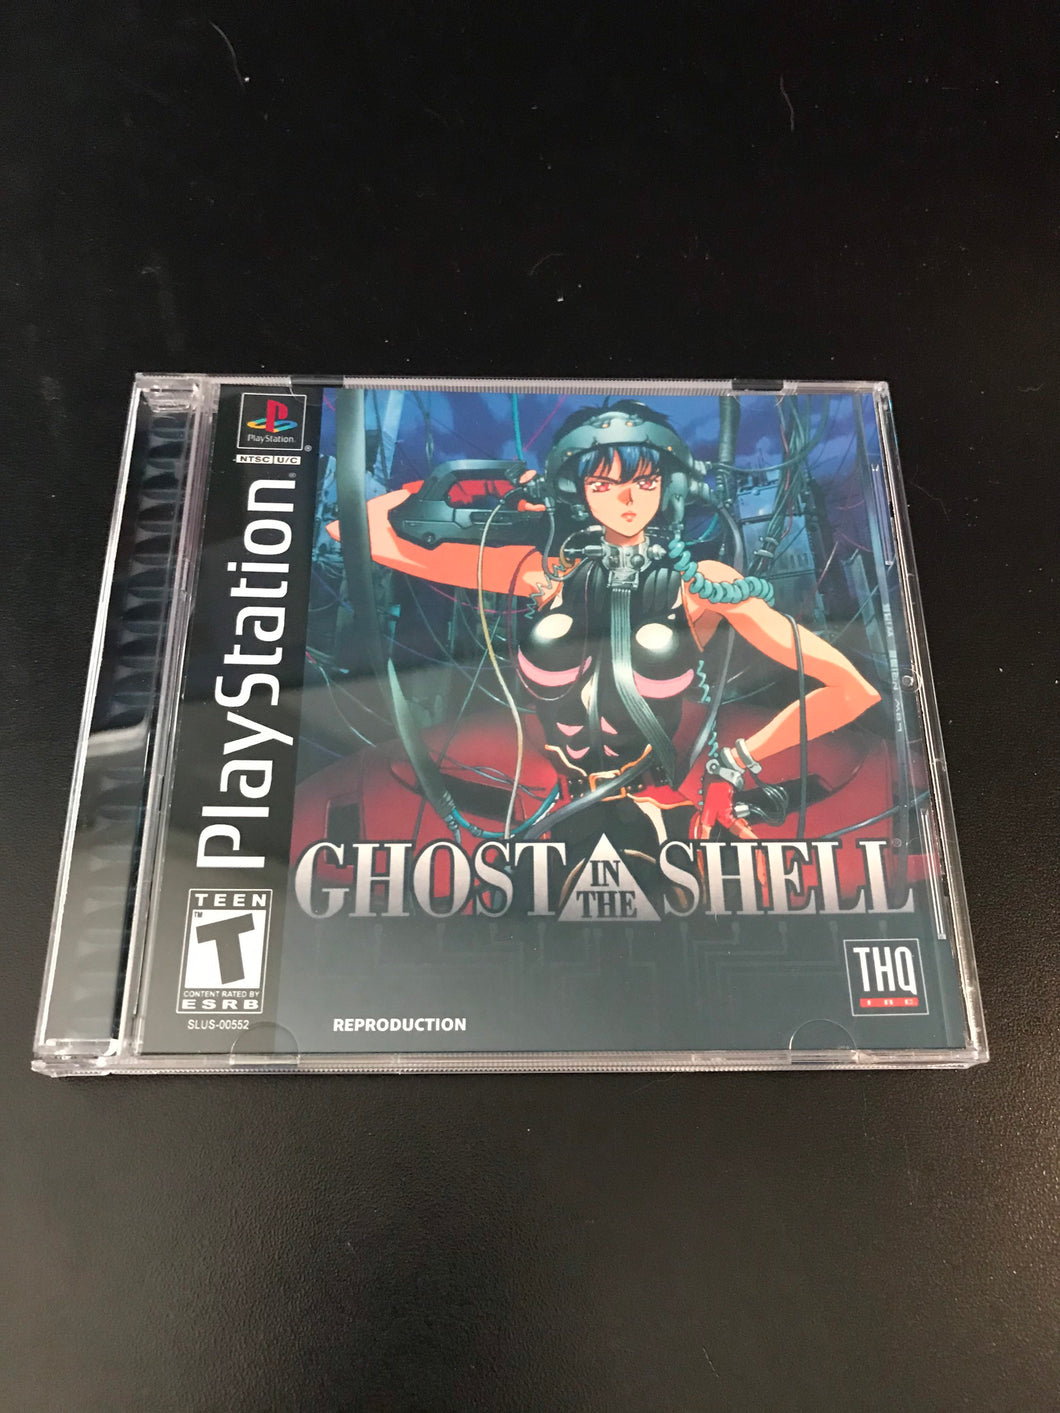 Ghost in the Shell PS1 Reproduction Case